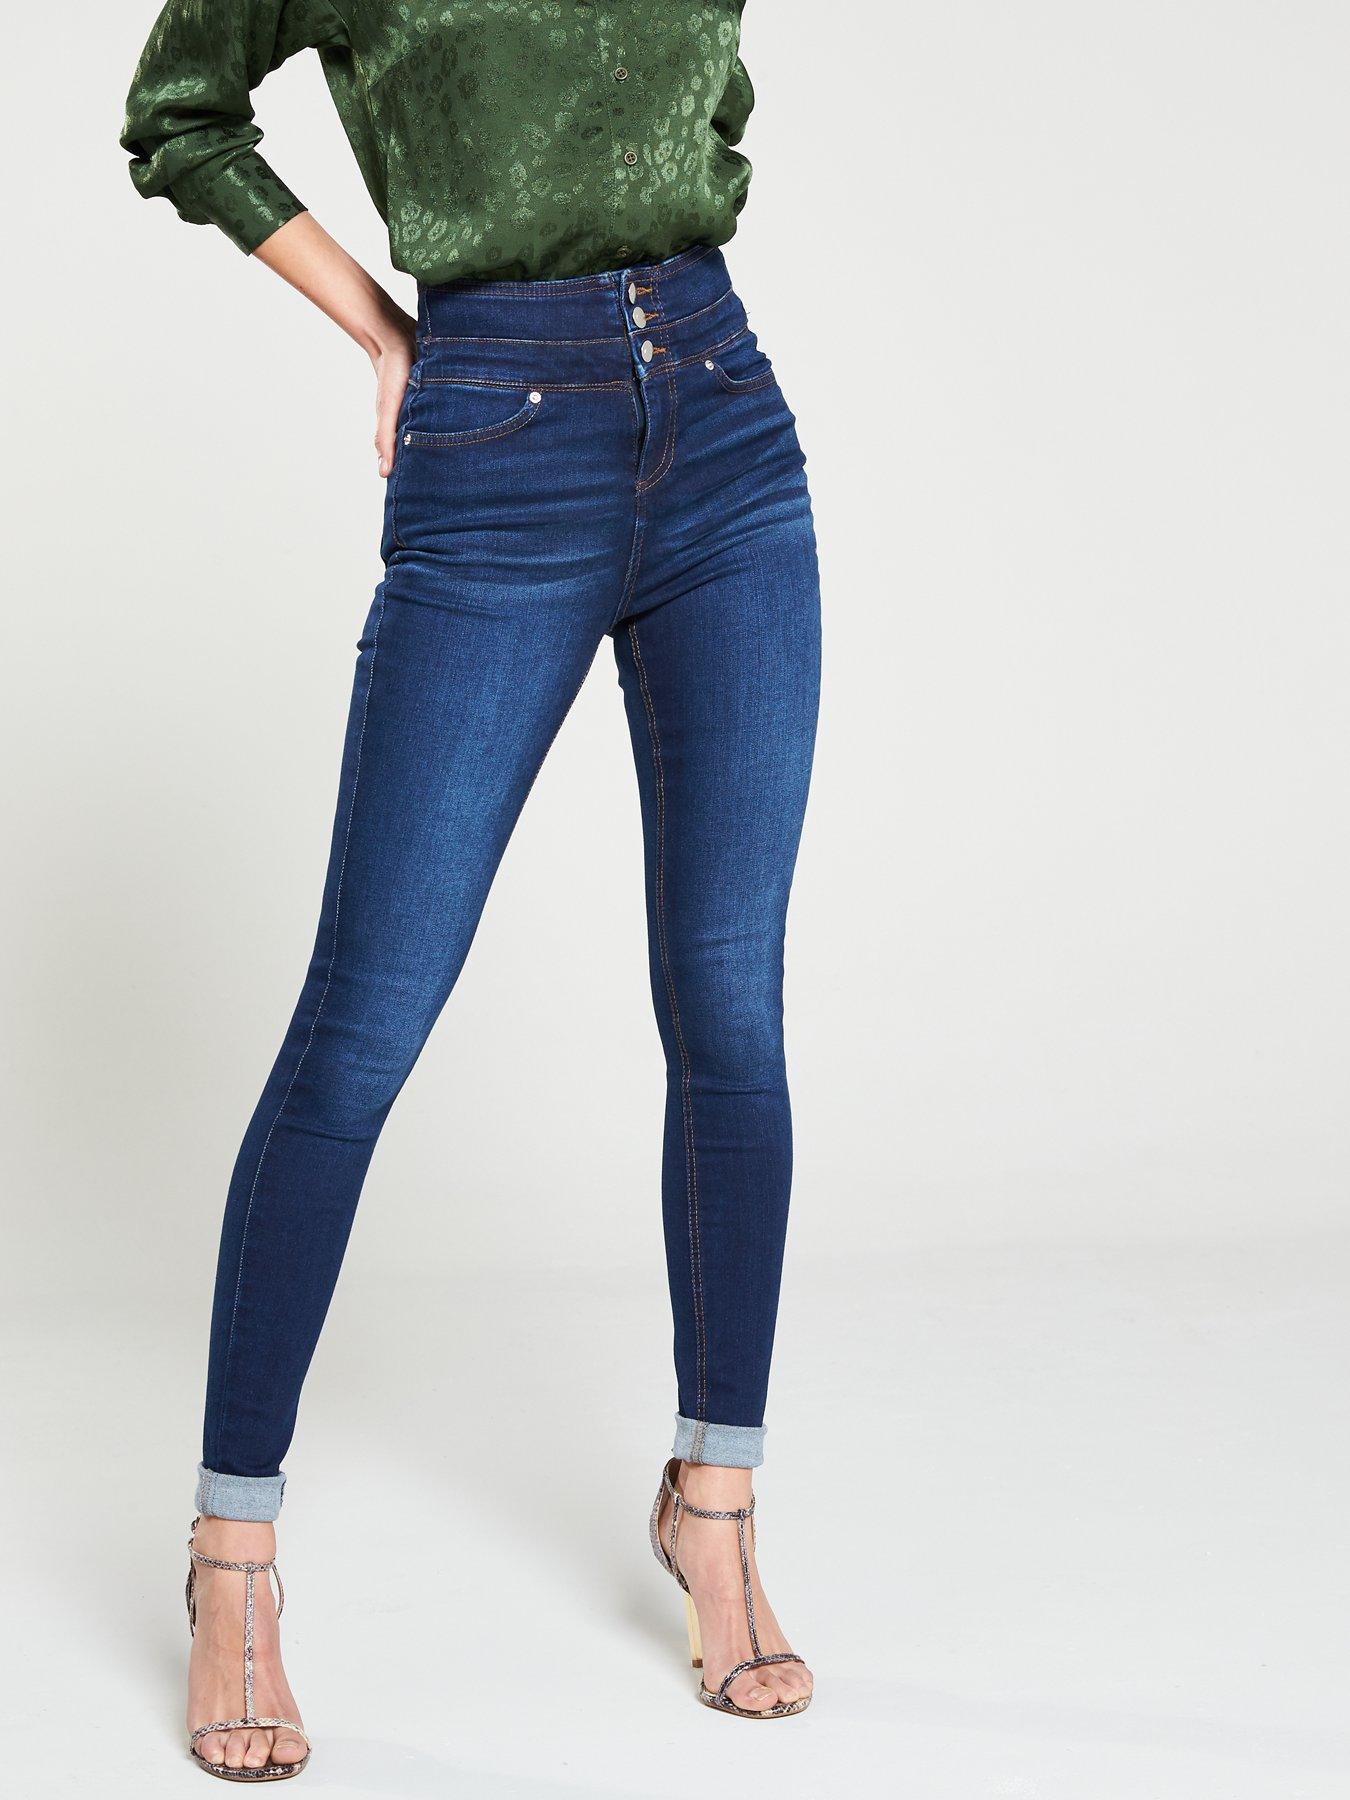 most comfortable skinny jeans uk